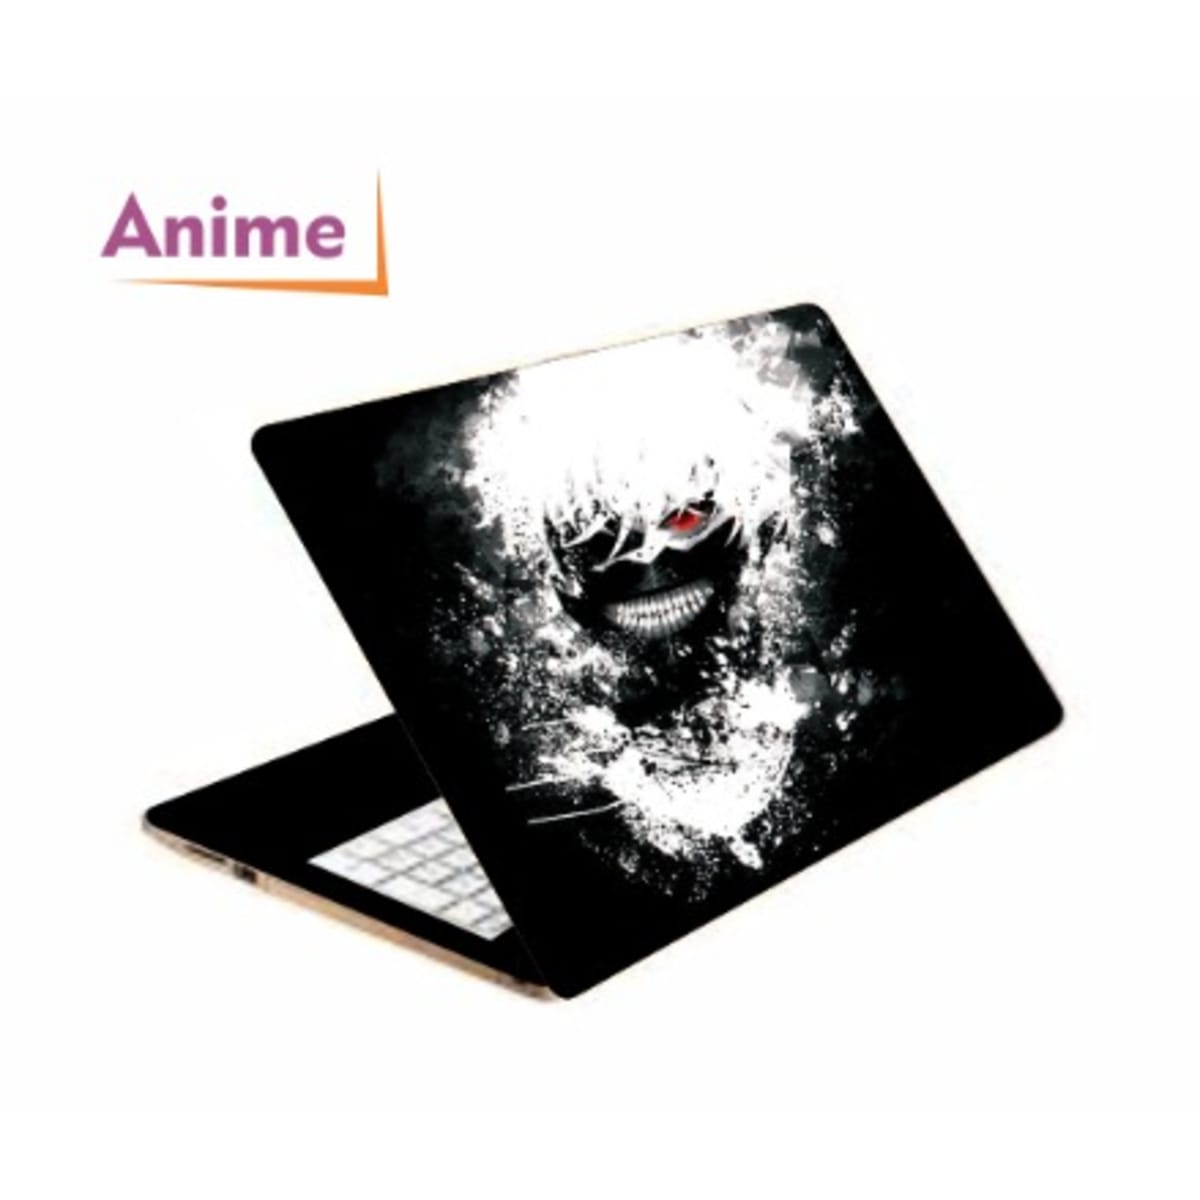 Yuckquee Anime Laptop Skin/Sticker/Vinyl for 14.1, 14.4, 15.1, 15.6 inches  for HP,Asus,Acer,Apple,Lenovo printed on 3M Vinyl, HD,Laminated,  Scratchproof A-2 Vinyl Laptop Decal 15.6 Price in India - Buy Yuckquee Anime  Laptop Skin/Sticker/Vinyl